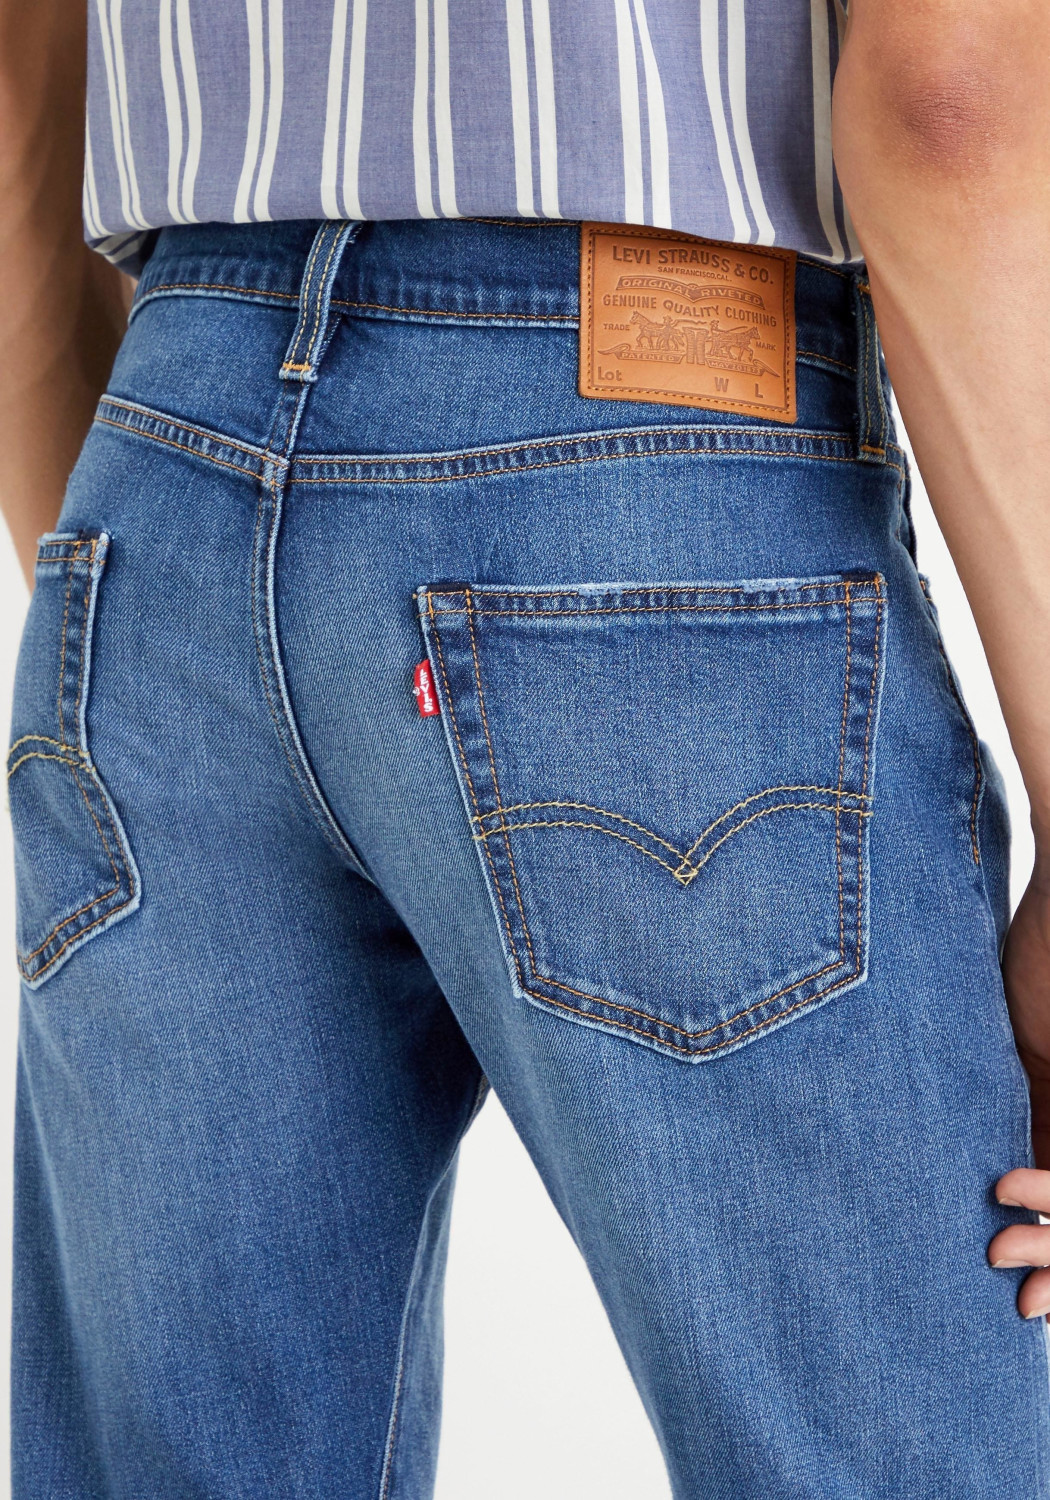 Buy Levi's 502 Regular Taper stacked advanced from £55.00 (Today ...